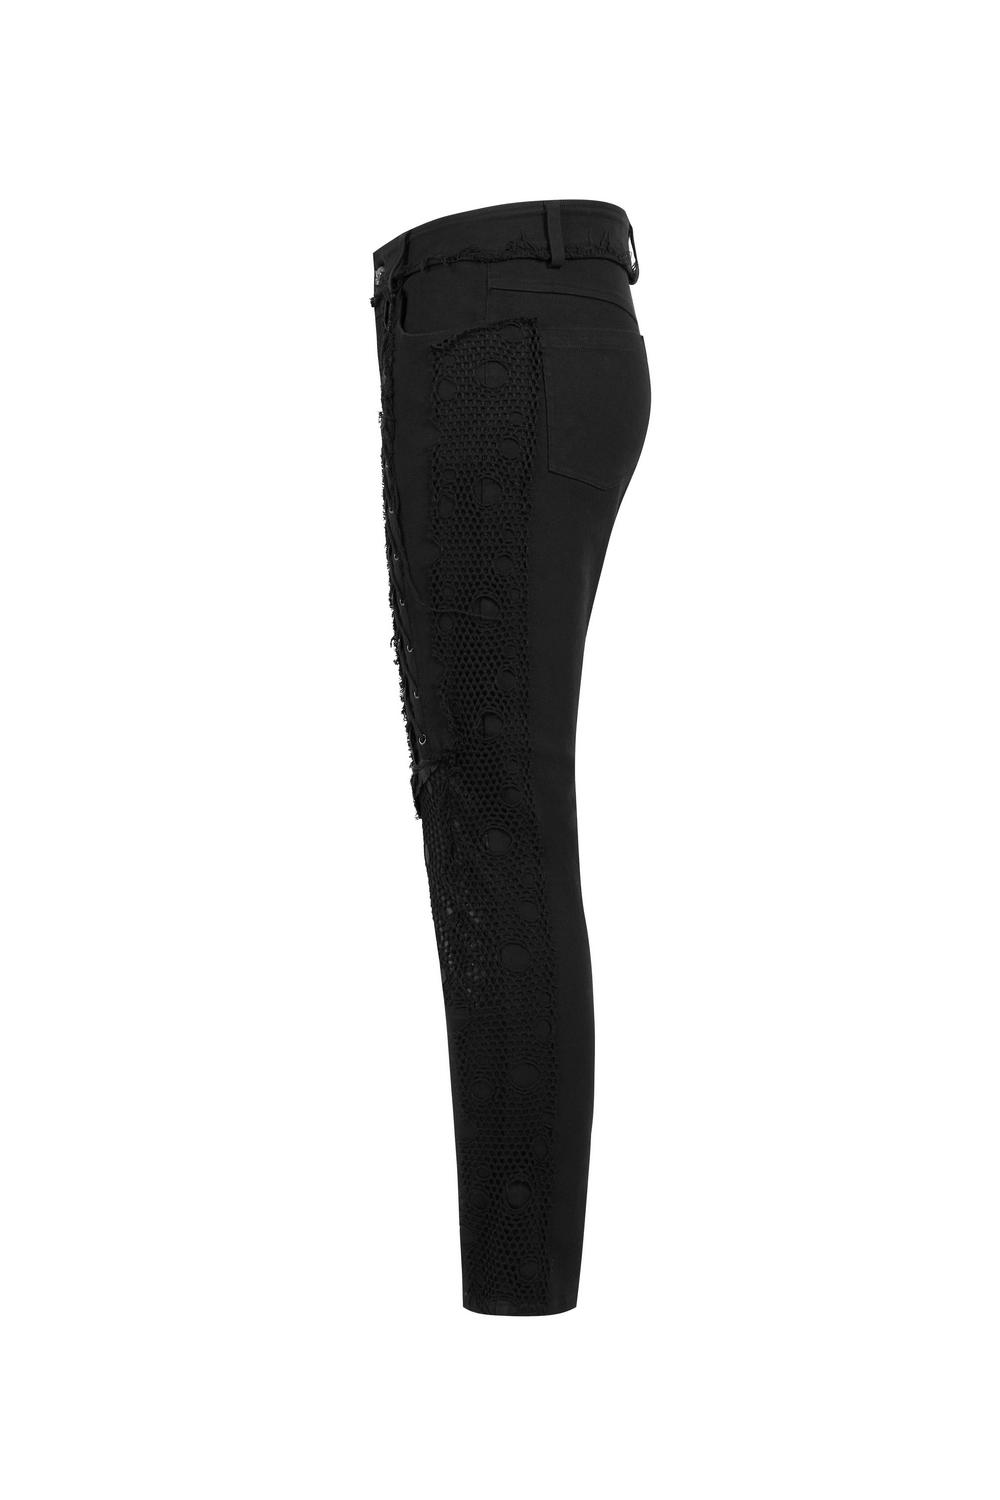 Edgy Black Mesh Panel Lace-Up Gothic Punk Trousers